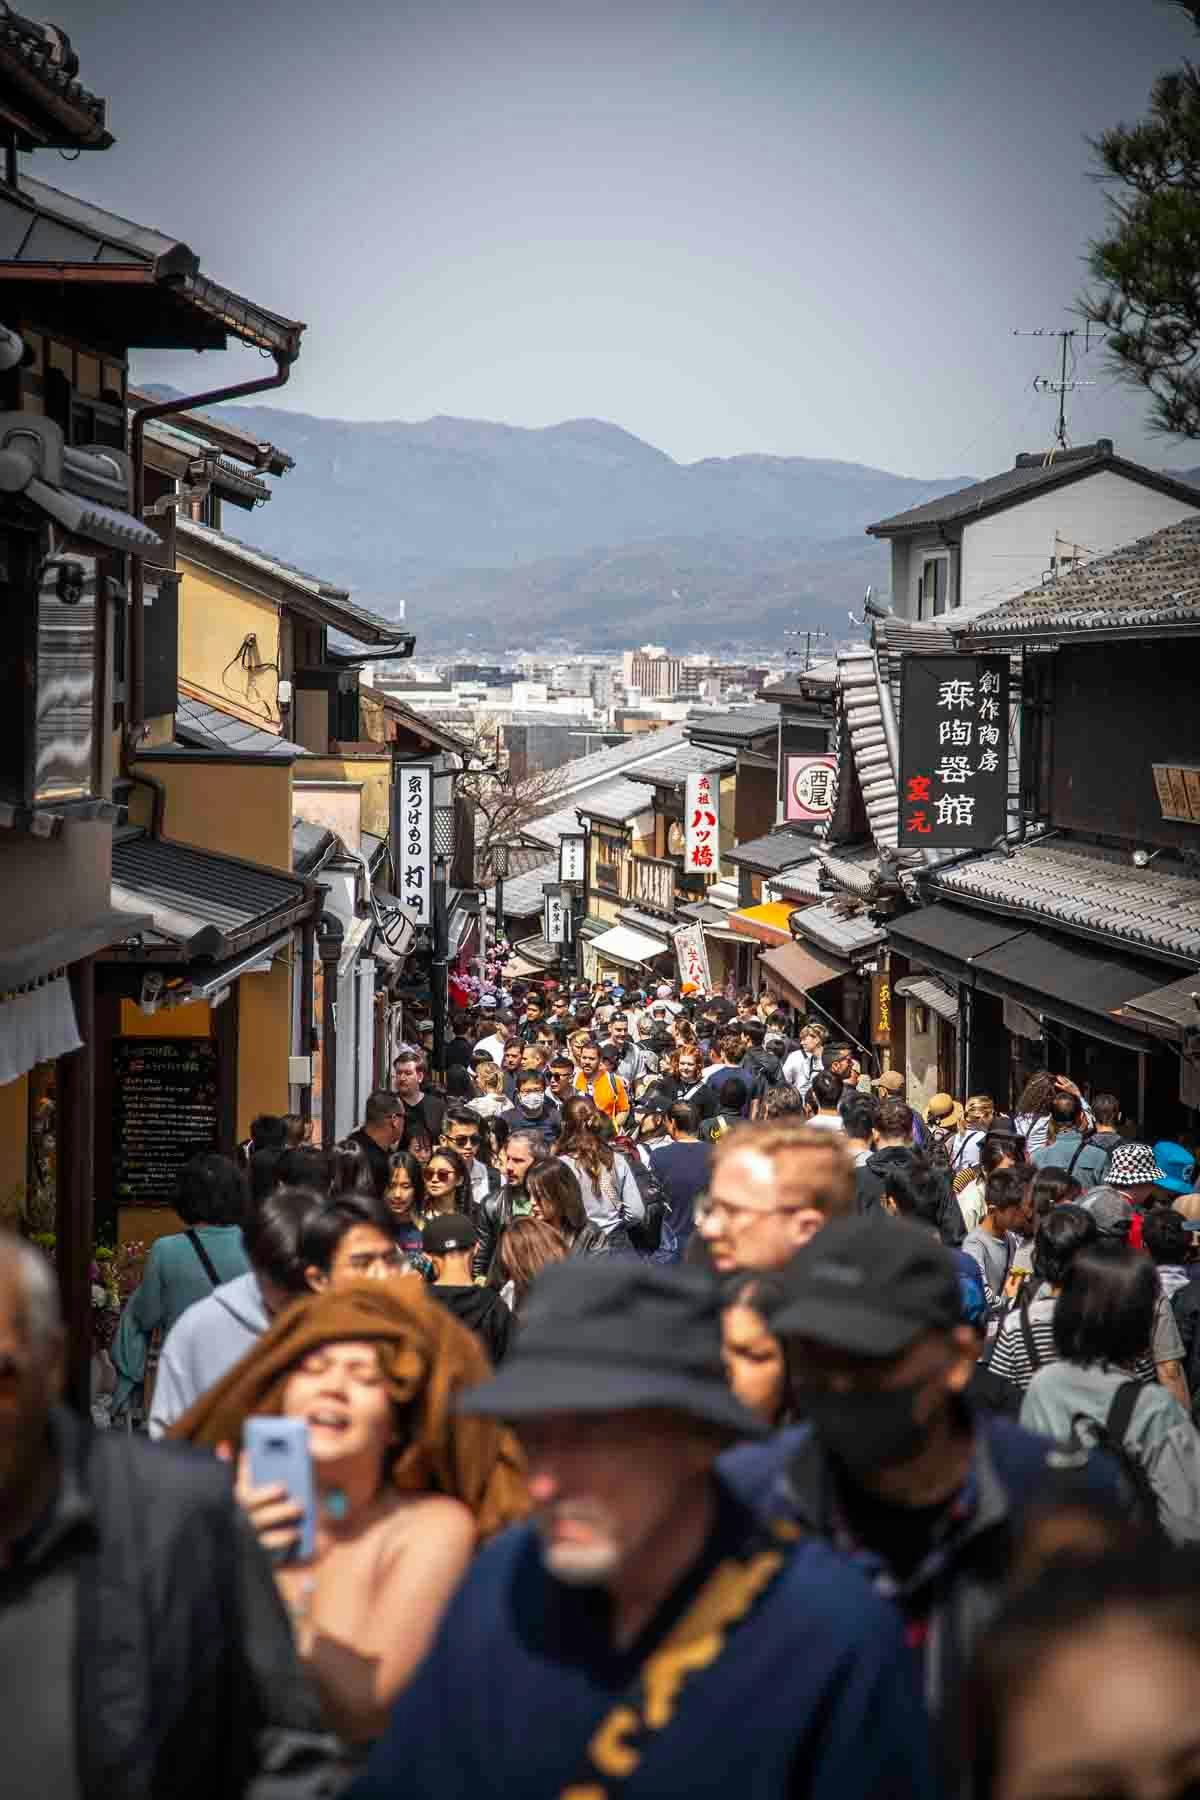 The streets leading up to Kiyomizudera Temple have become very crowded. Photo source: James Saunders-Wyndham